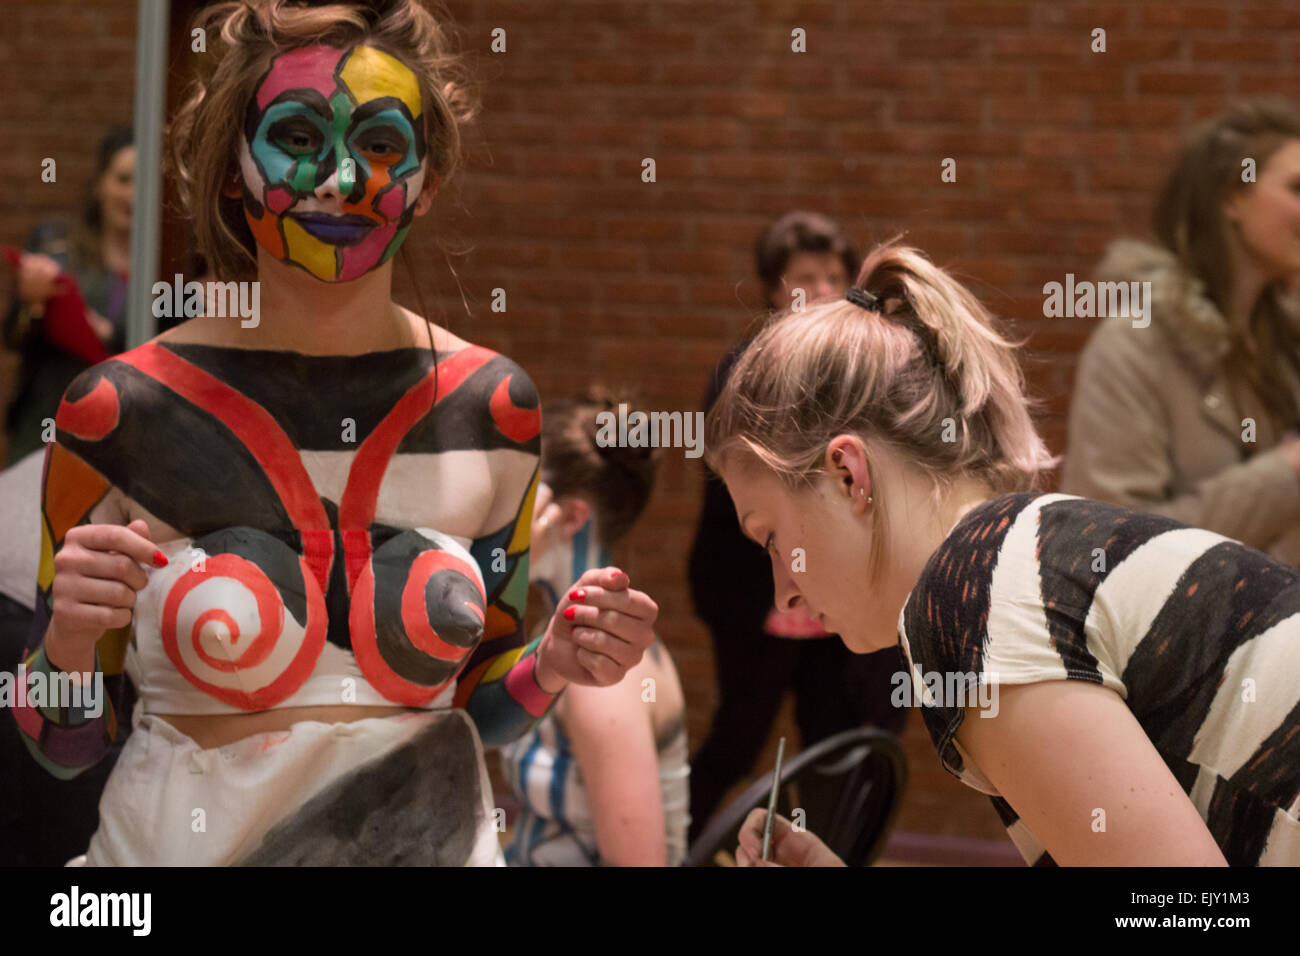 Woman putting final touches of body paint onto a female model in costume and face paint. Stock Photo